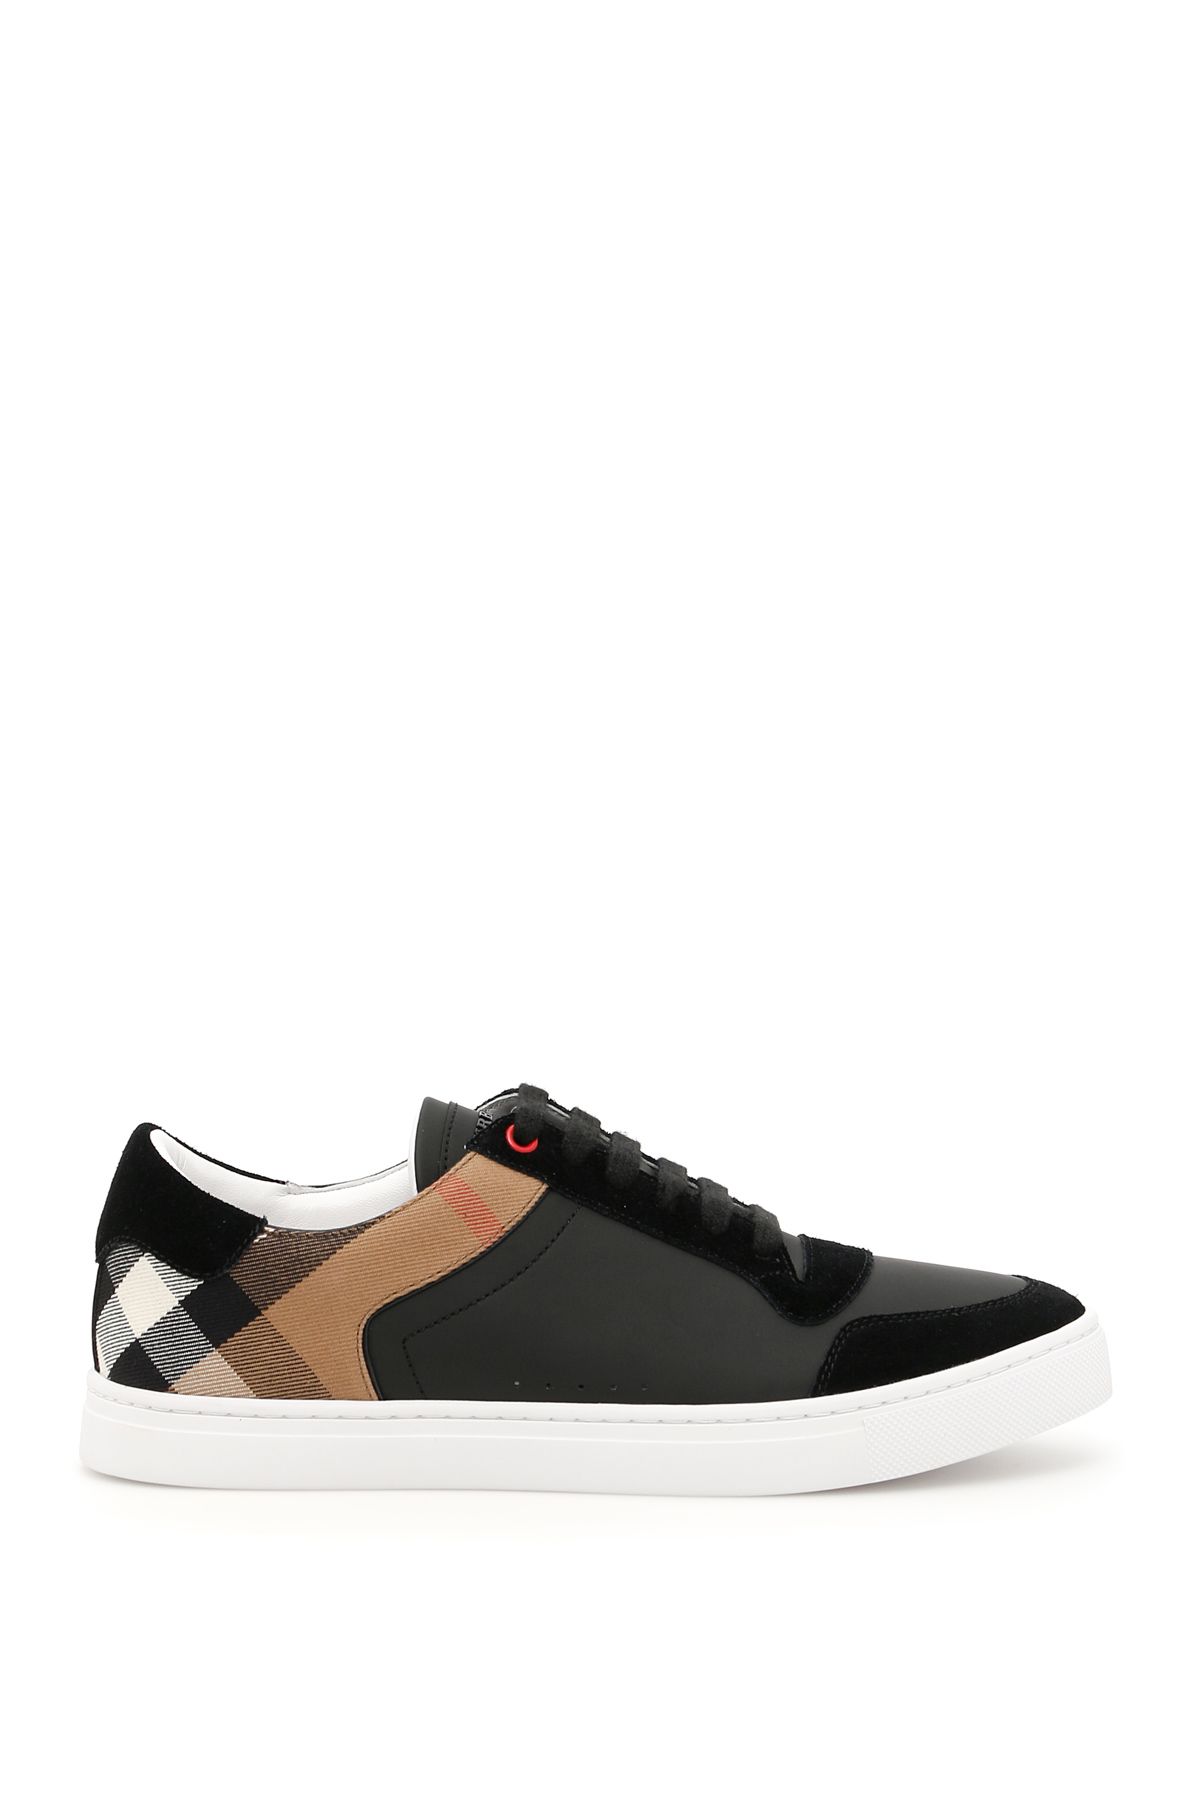 burberry sneakers for sale